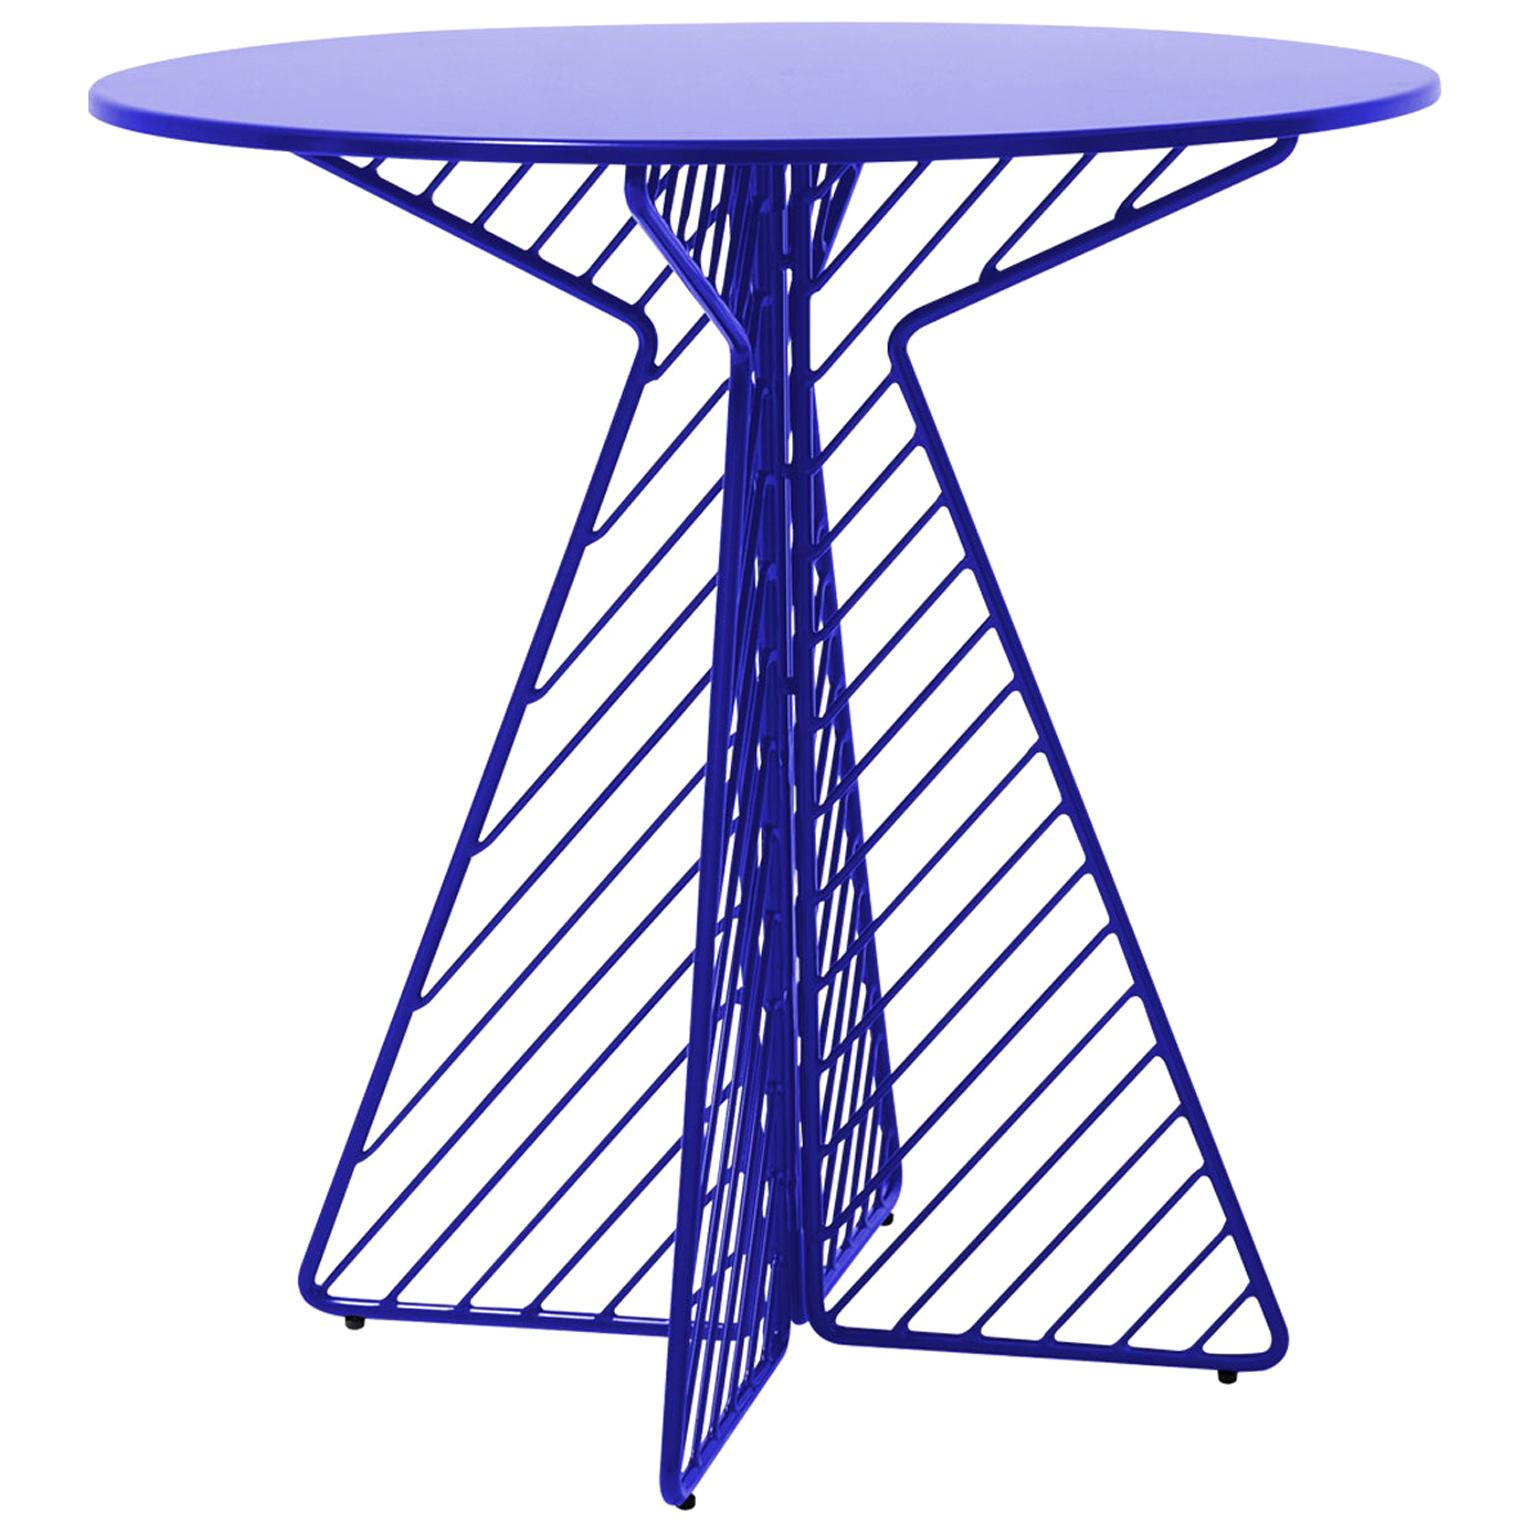 Cafe Table, Metal wire Flat Pack Dining Table by Bend Goods in Electric Blue